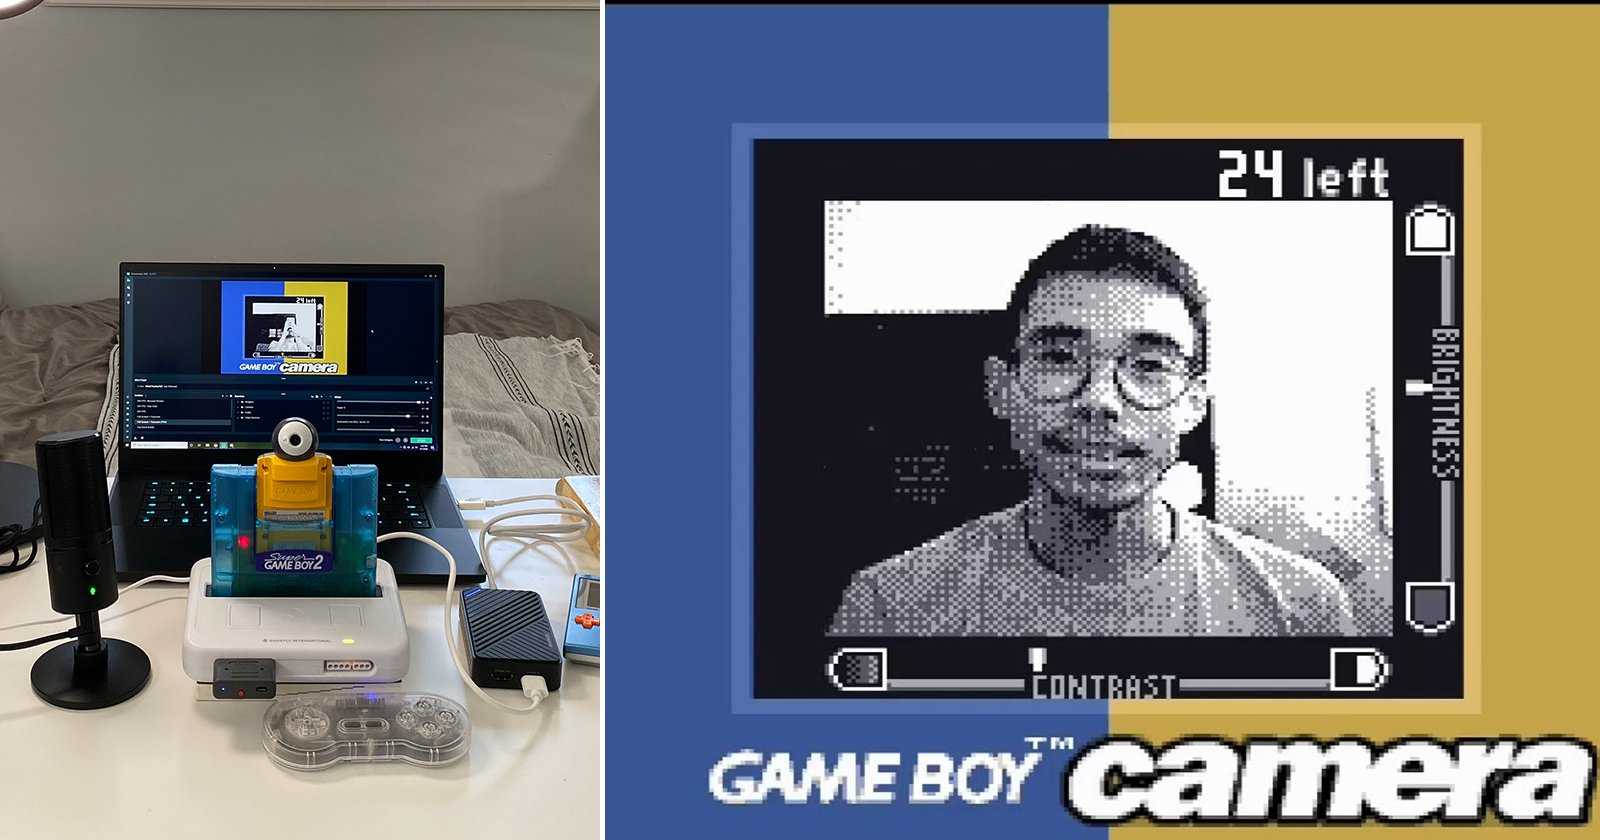 instinct Huh Treble This Guy Turned His Game Boy Camera Into a Functional Webcam | PetaPixel